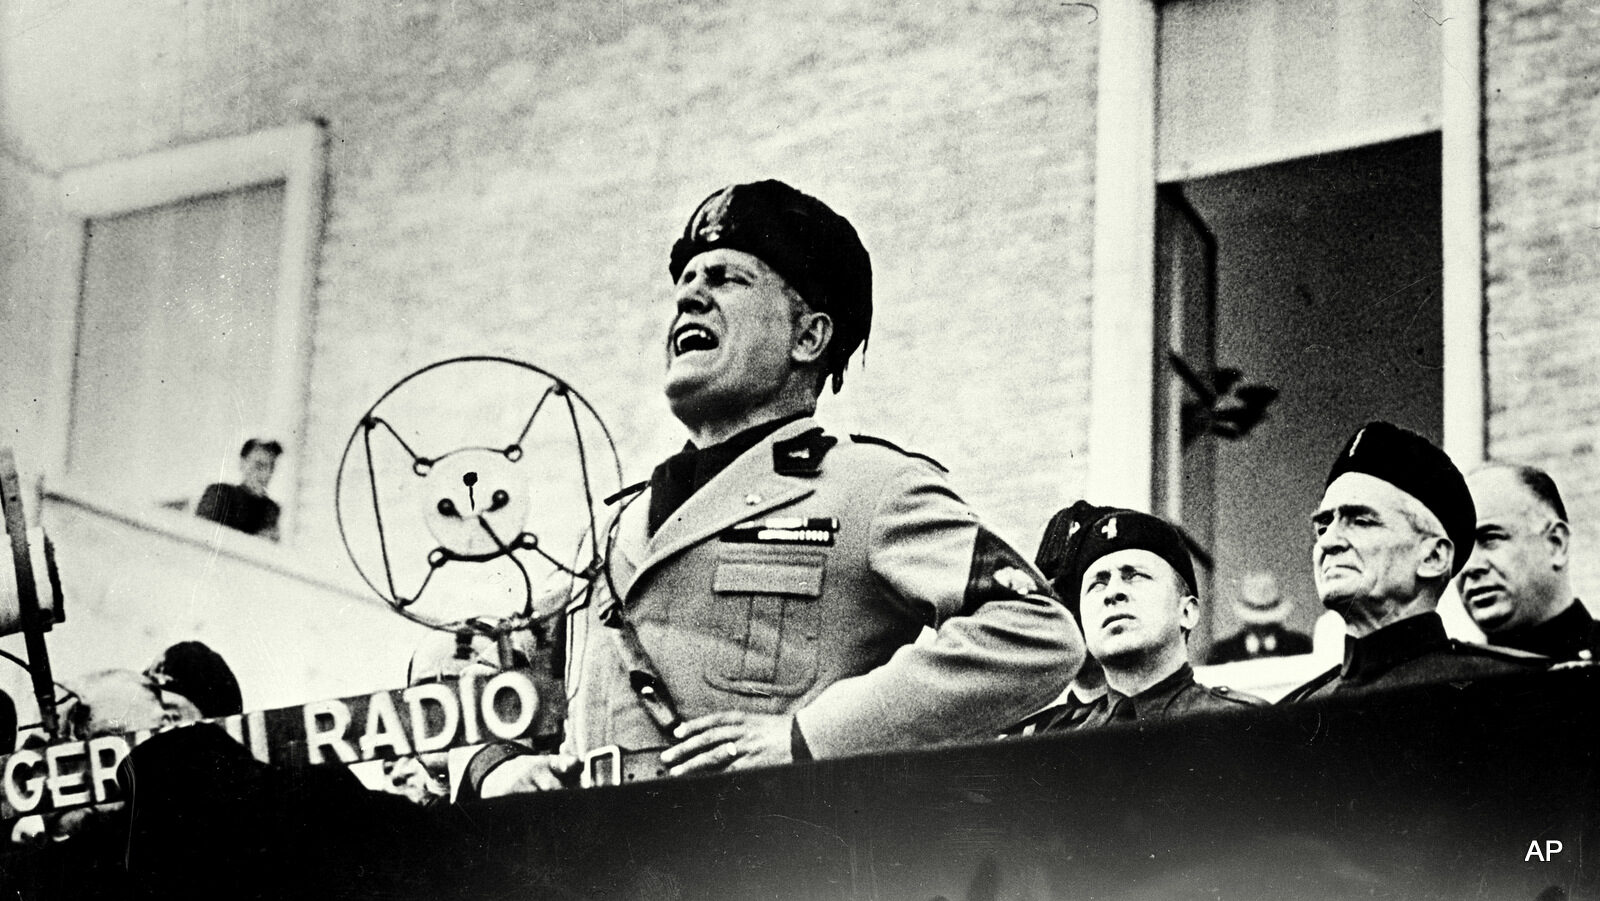 Benito Mussolini, Italian dictator, speaks at the dedication ceremonies of Sabandia, central Italy, on Sept. 24, 1934.